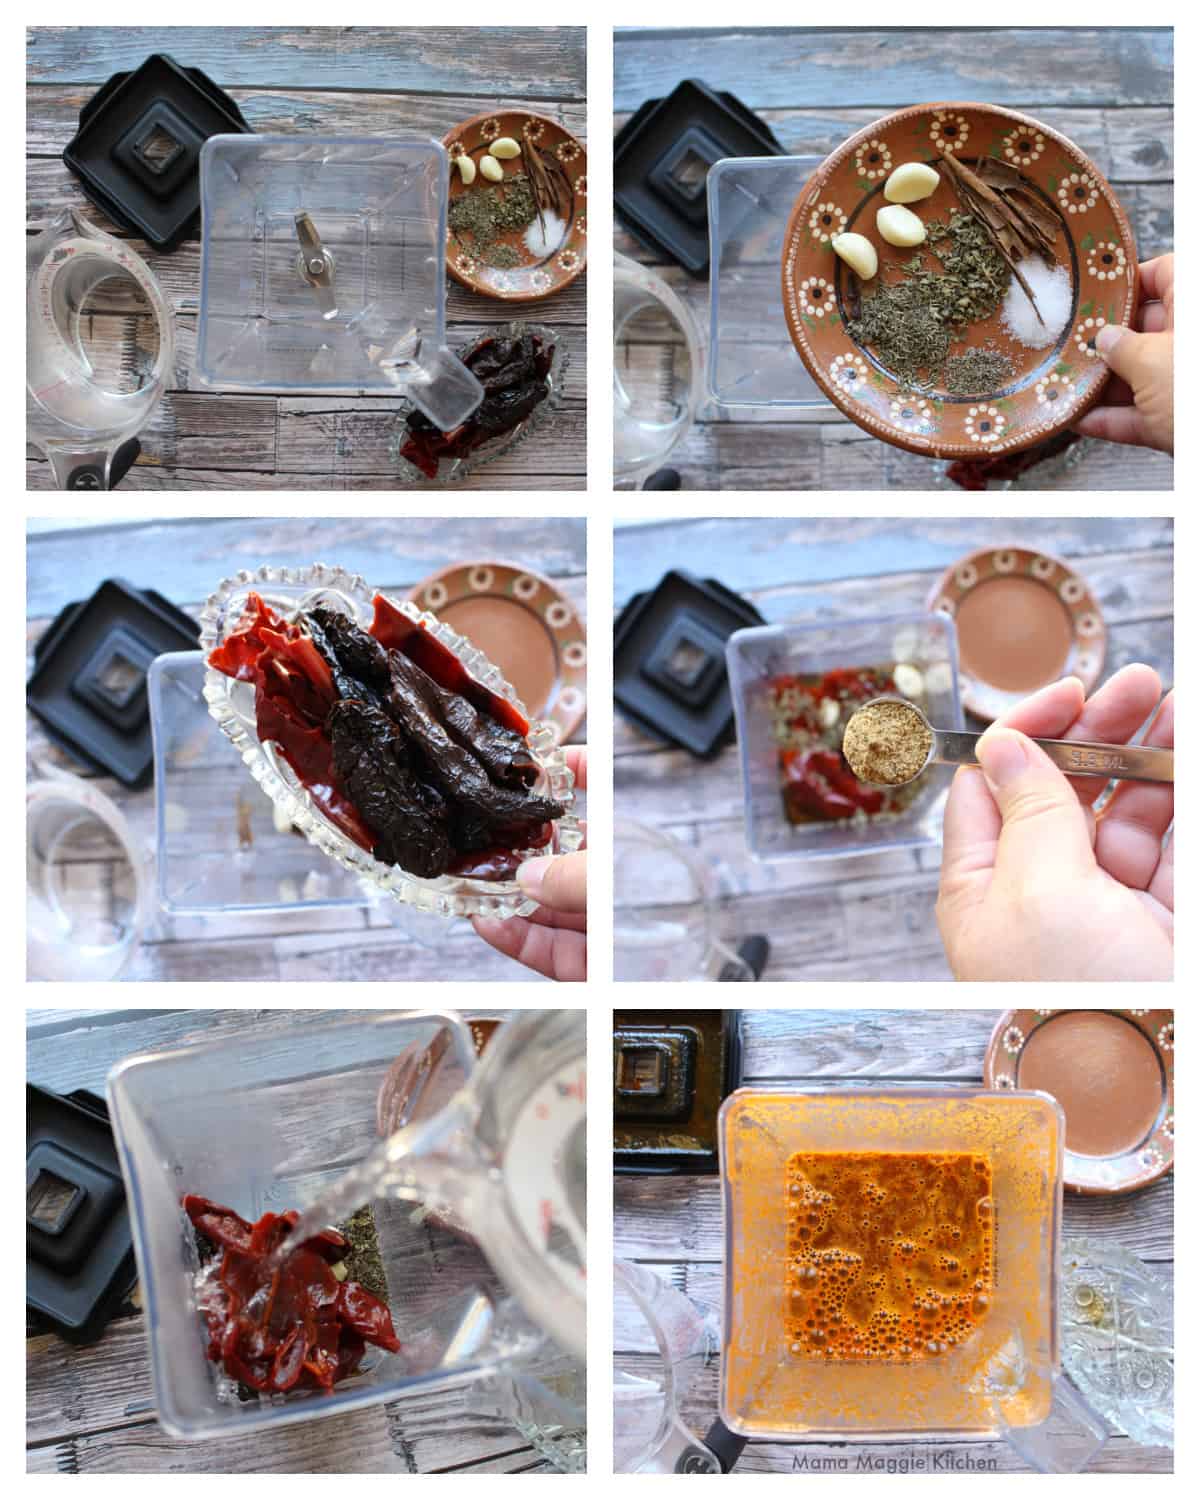 A collage showing how to make the red chile sauce.